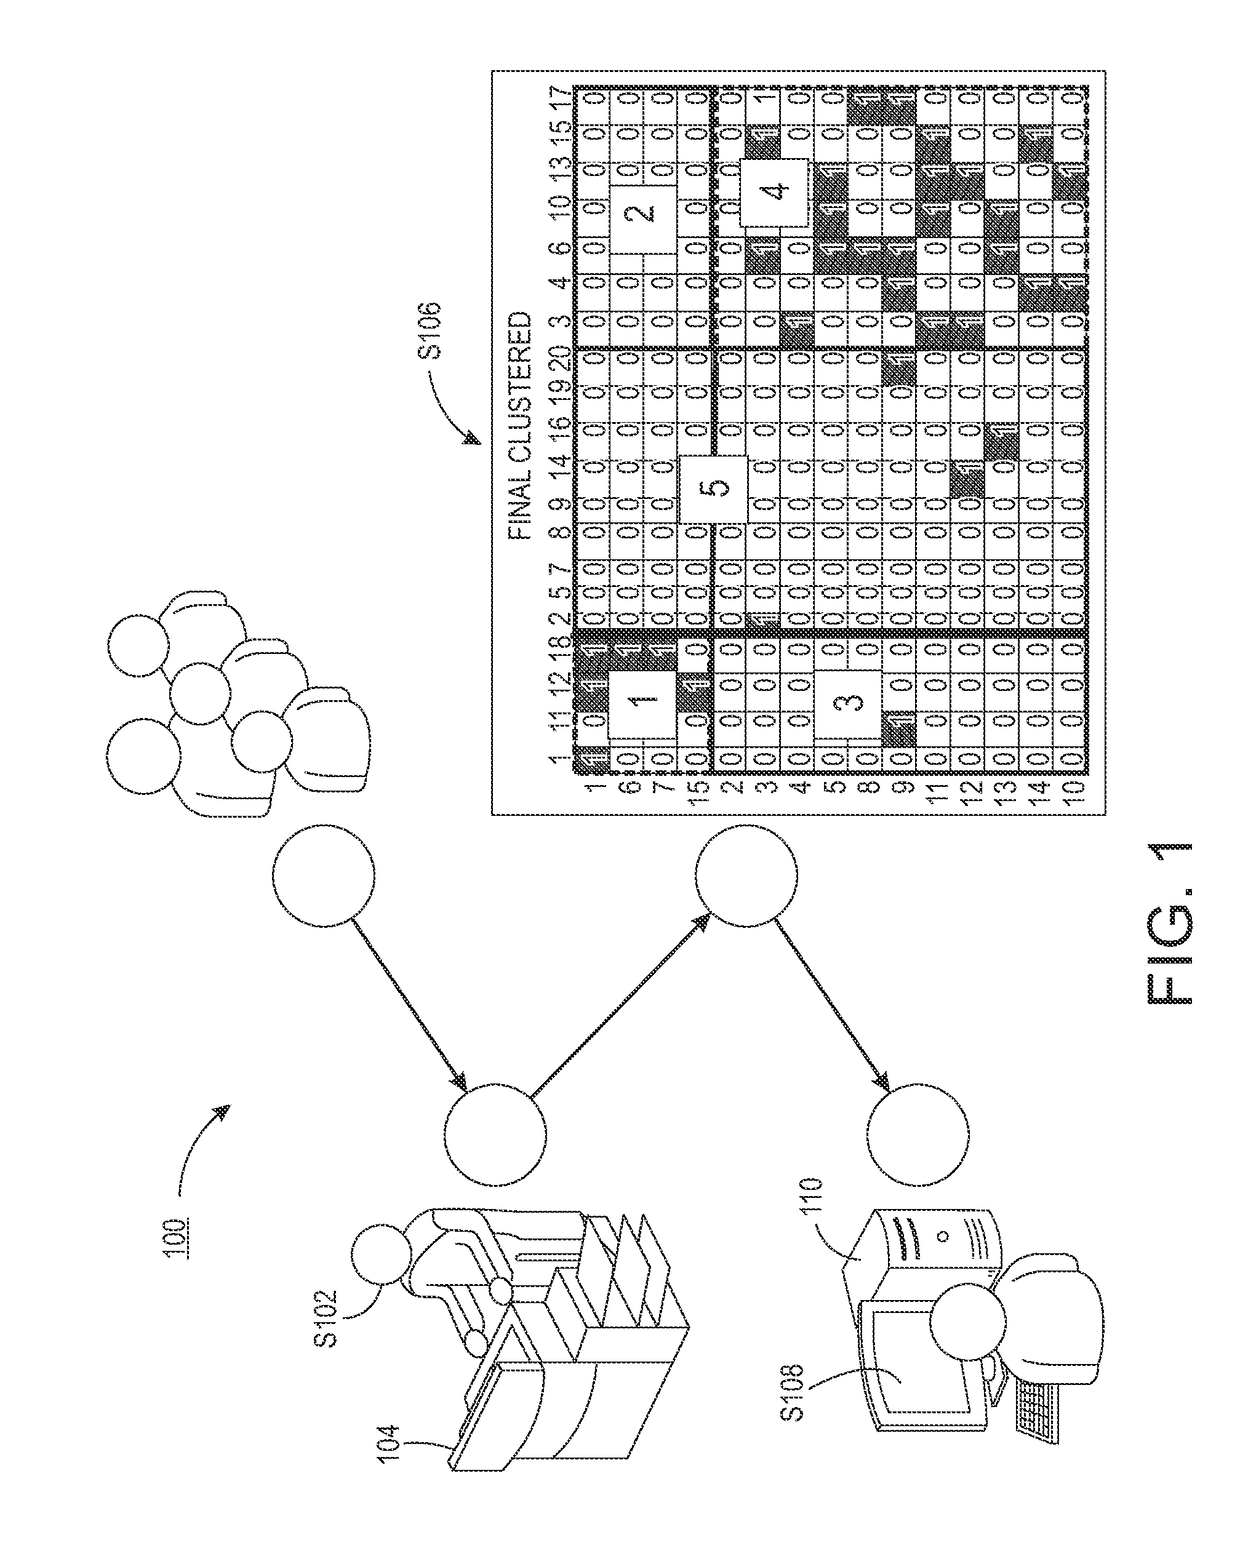 Latent student clustering using a hierarchical block clustering method